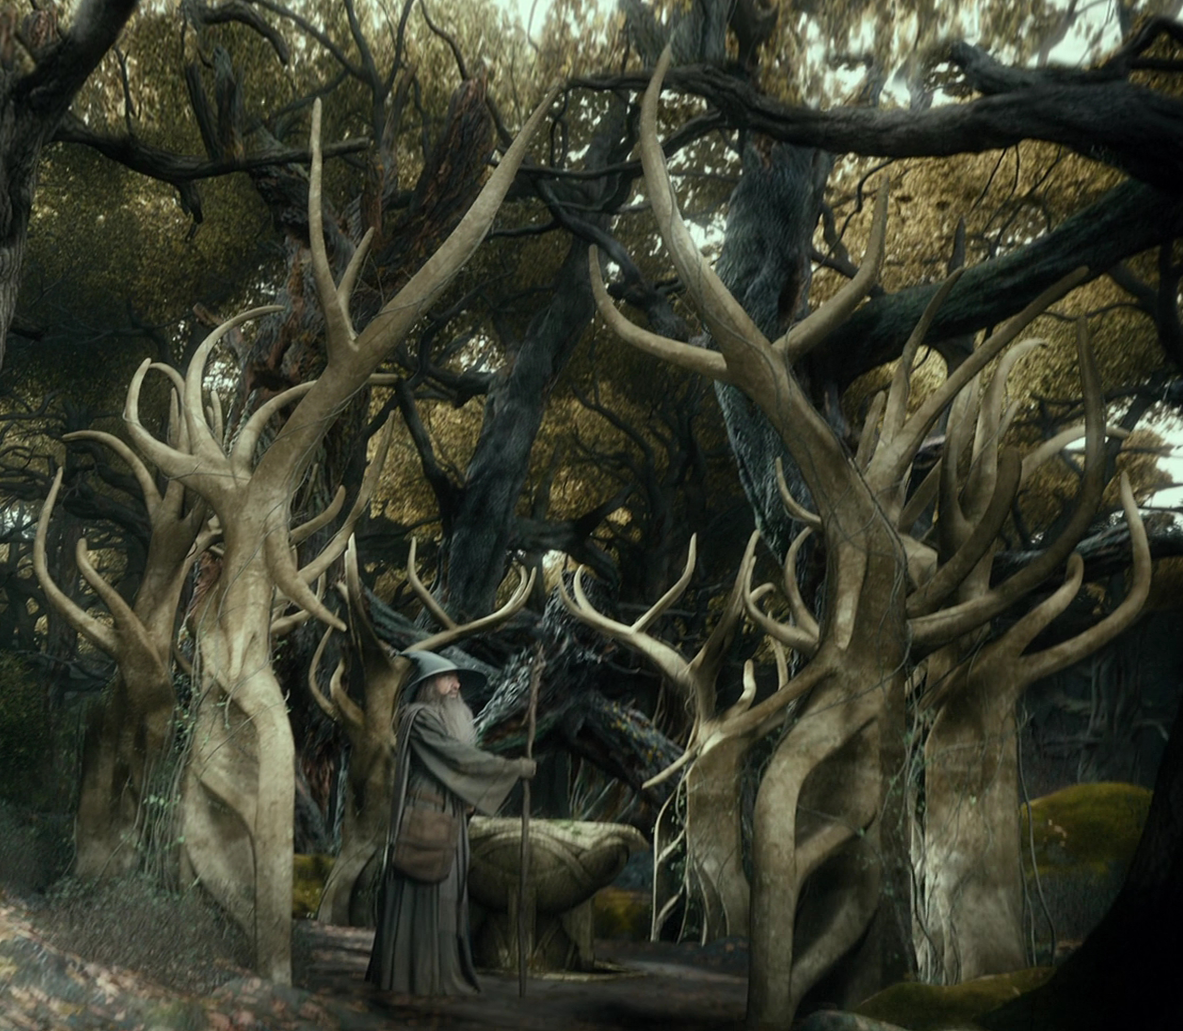 LOTR: What Would Happen If The One Ring Had Fallen Into Treebeard's Hands?